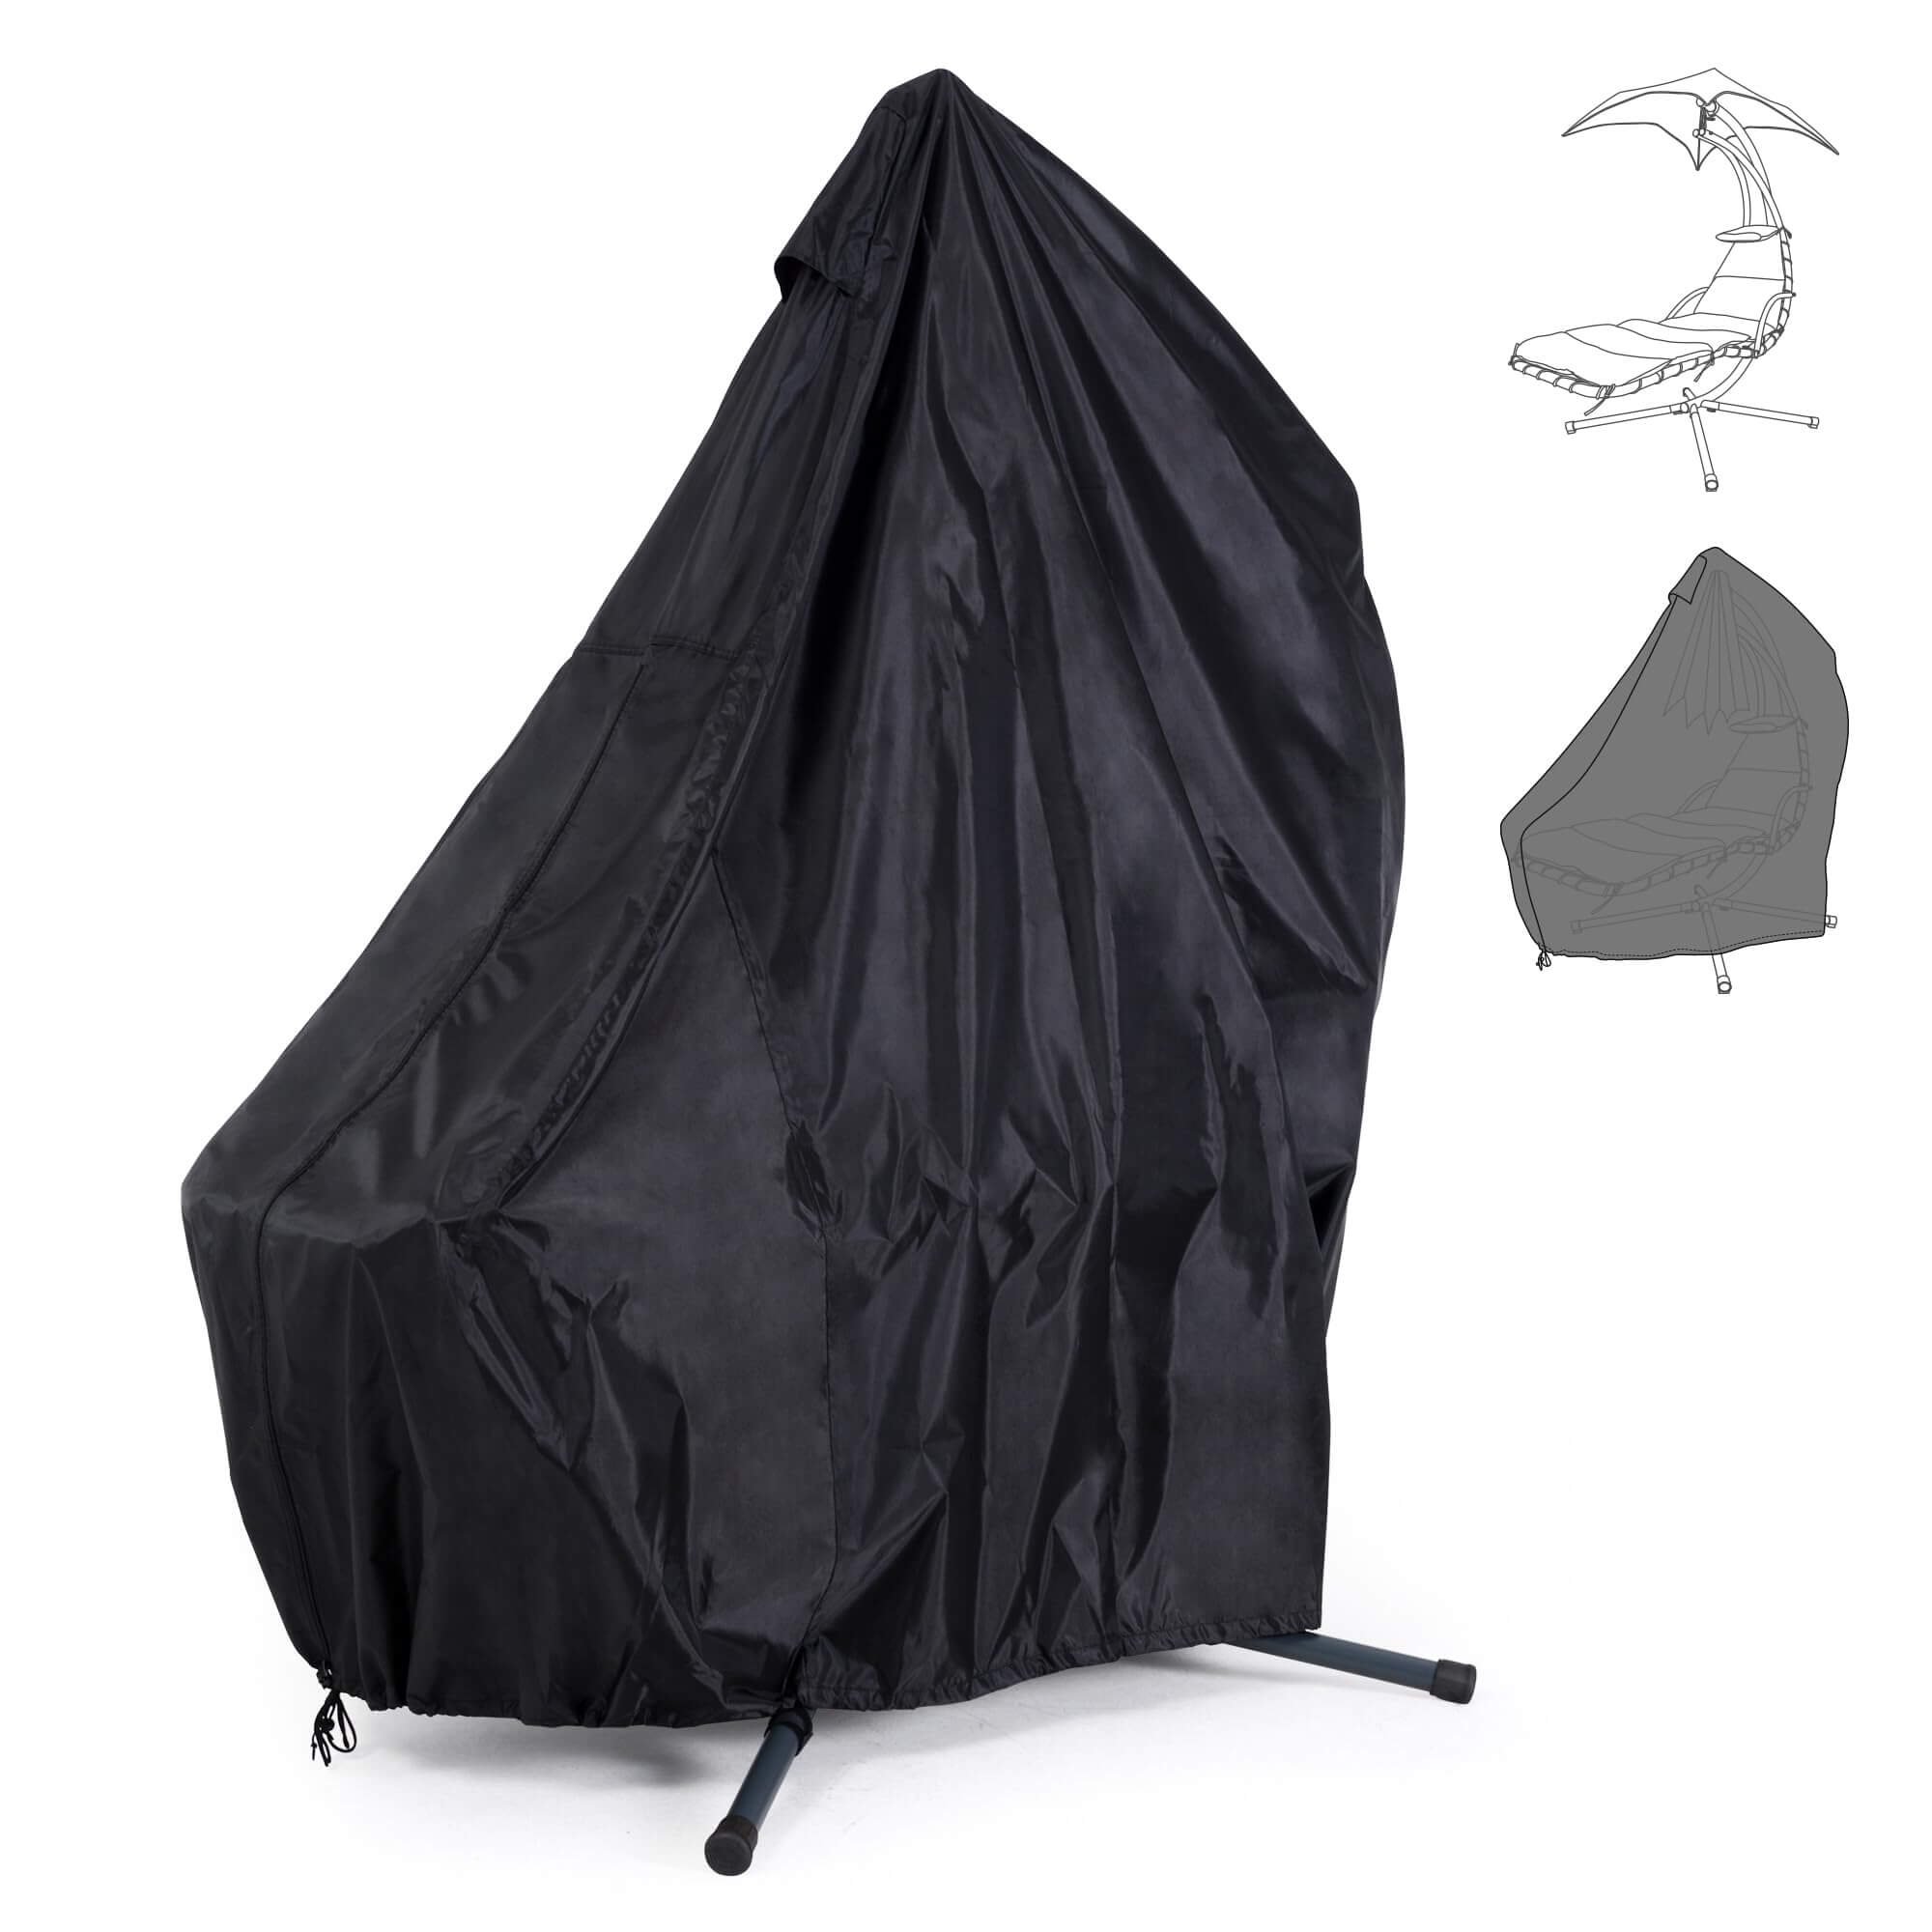 SUNCREAT Chaise Lounge Chair Cover#size_for-chaise-lounge-chair-swing